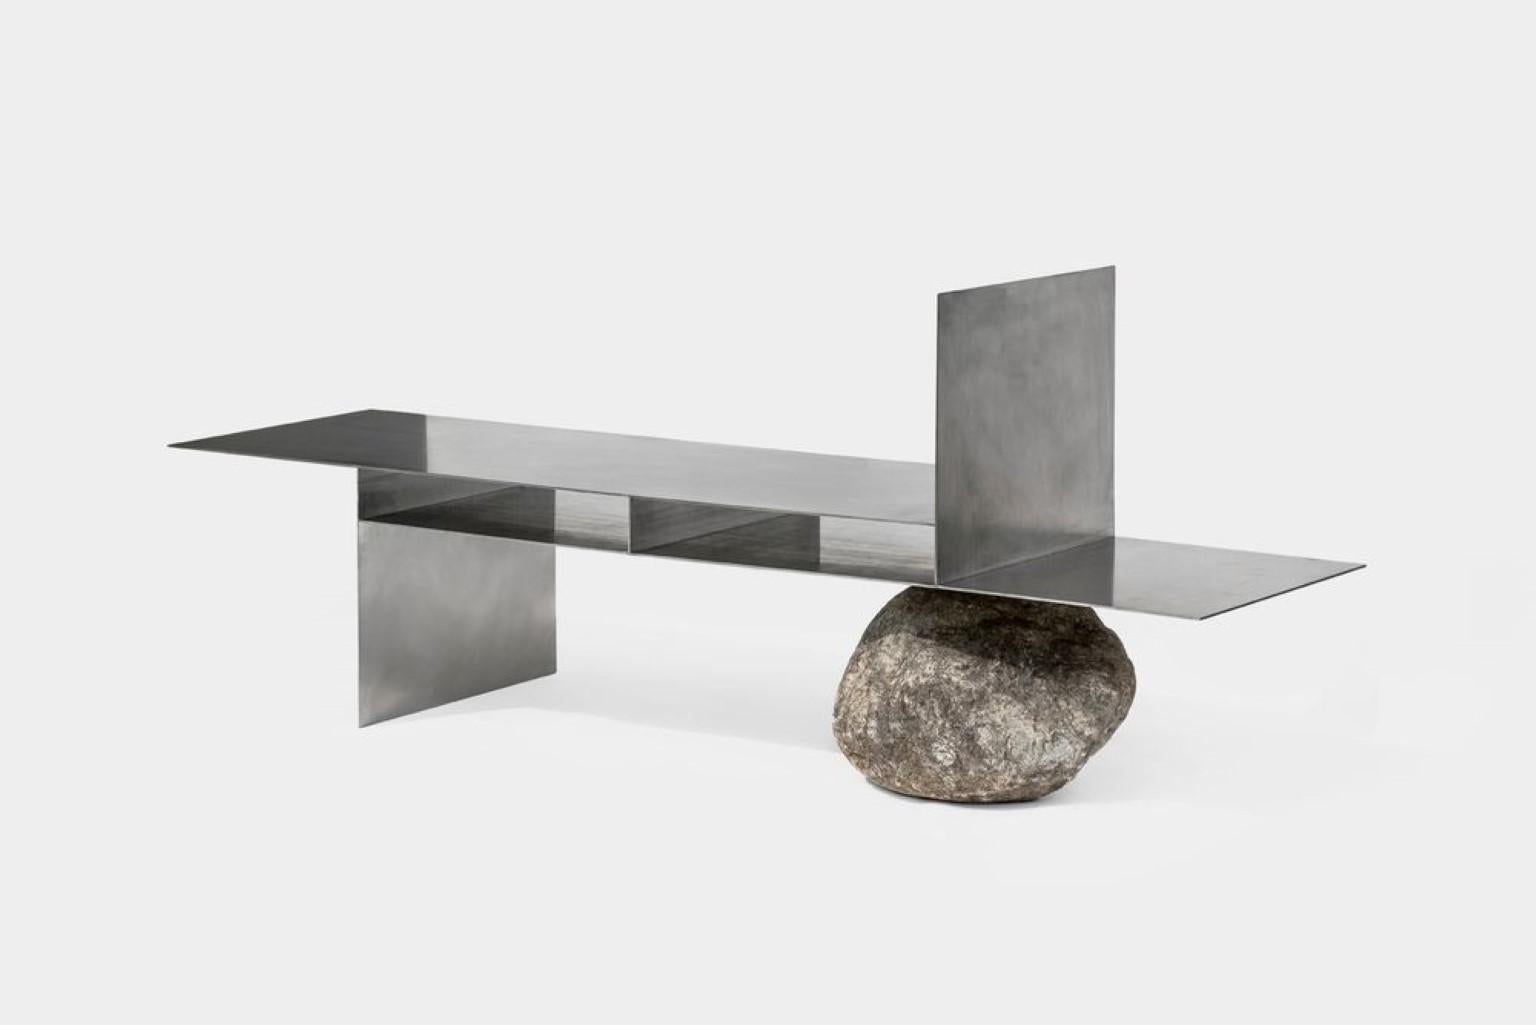 Proportions of stone console by Lee Sisan
Dimensions: : 180 x 50 x 80 cm
Materials: stainless steel, natural stone

Each piece is made to order and uses natural stones, so please expect some variability in design.

